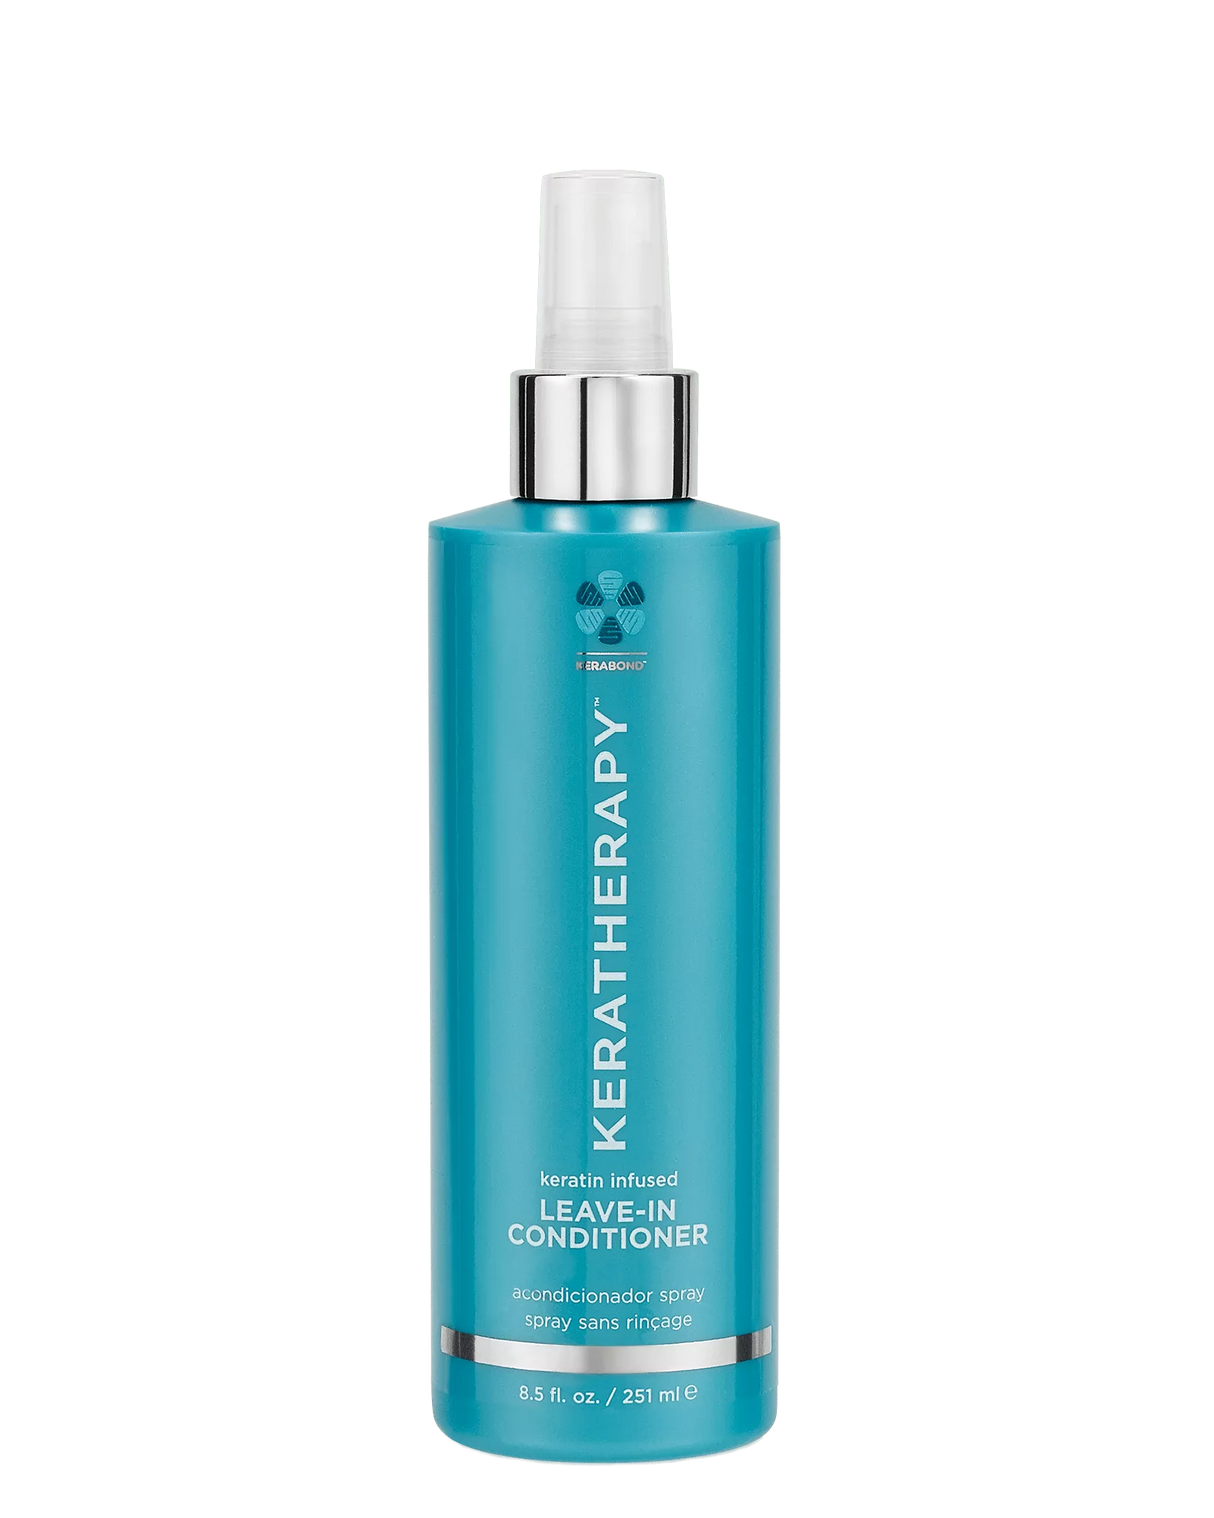 Keratherapy Keratin-Infused LEAVE IN CONDITIONER